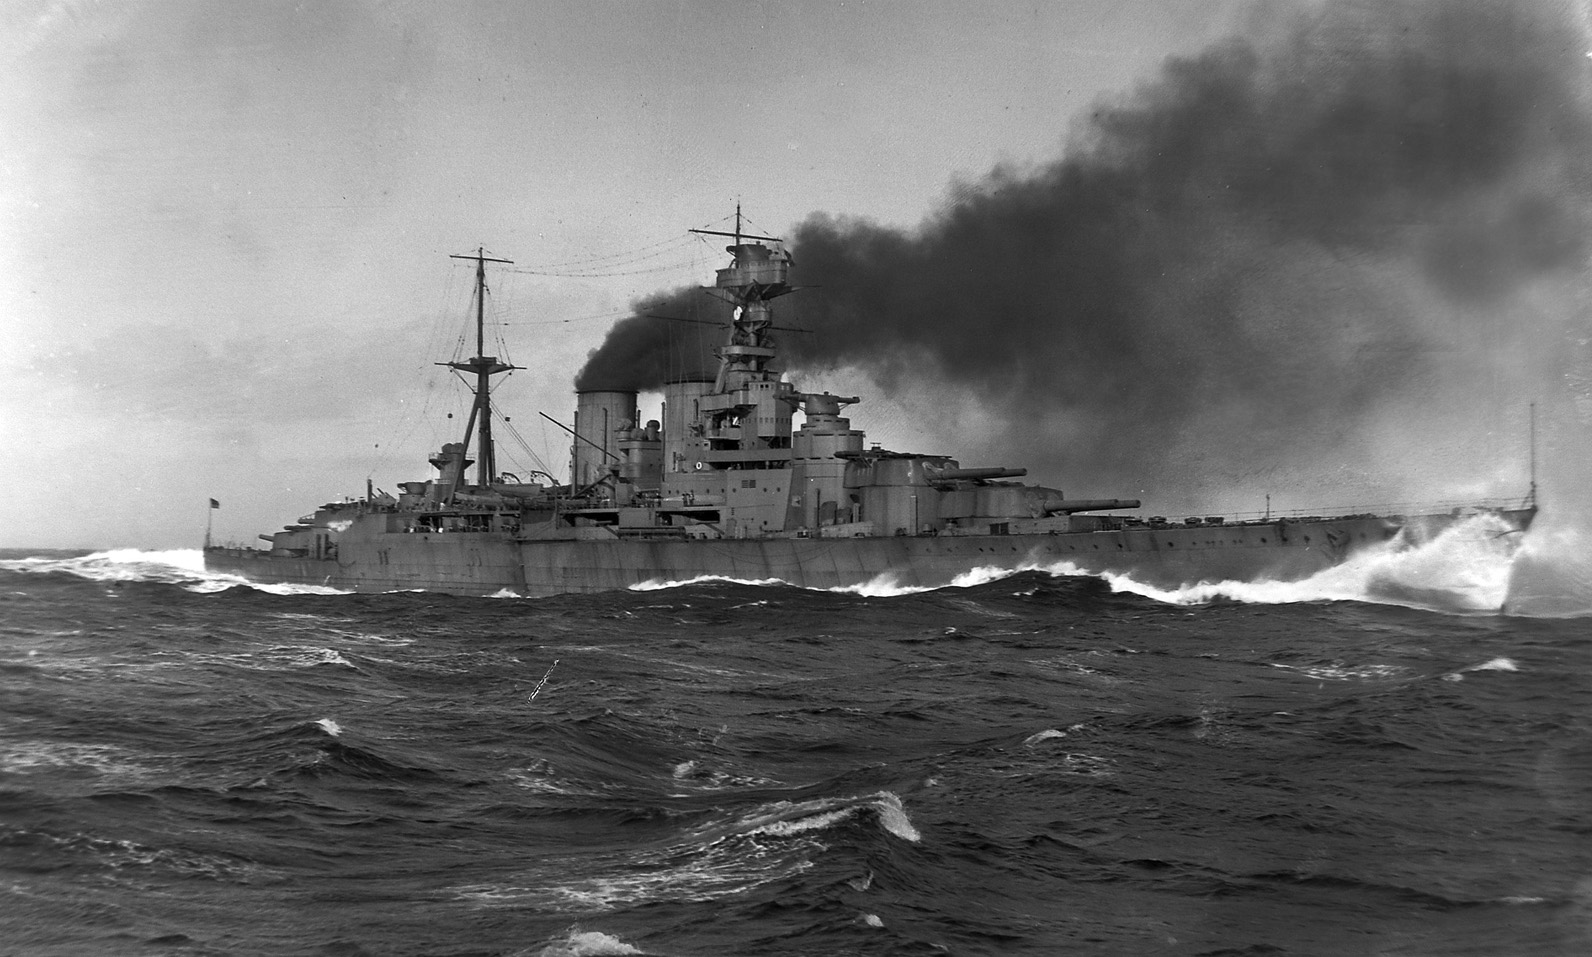 HMS Hood did not have as thick or extensive armor the Bismarck putting her at a decisive disadvantage in the Battle of the Denmark Strait.